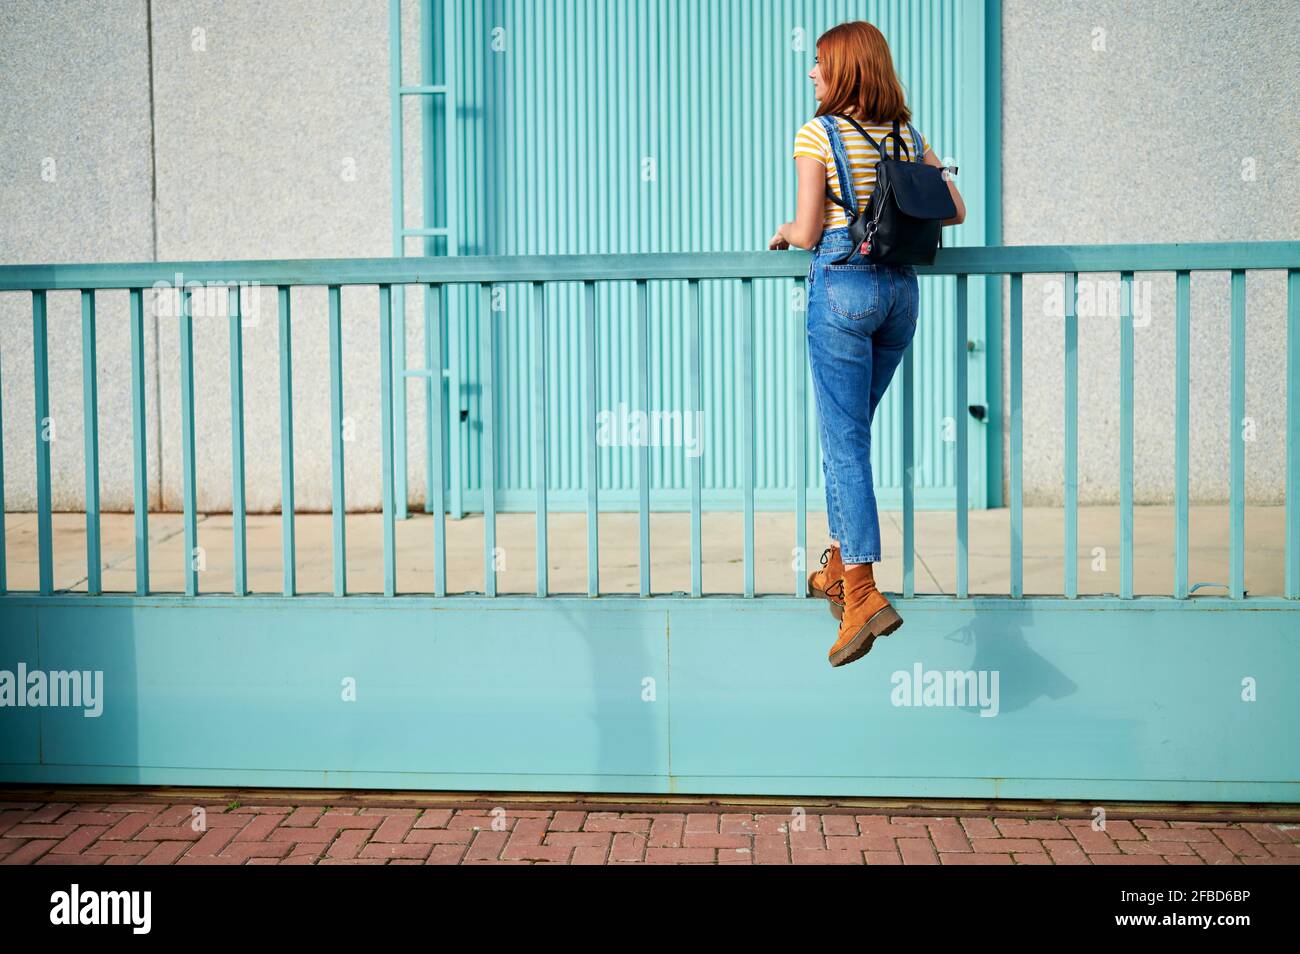 Young woman climbing on turquoise blue railing Stock Photo